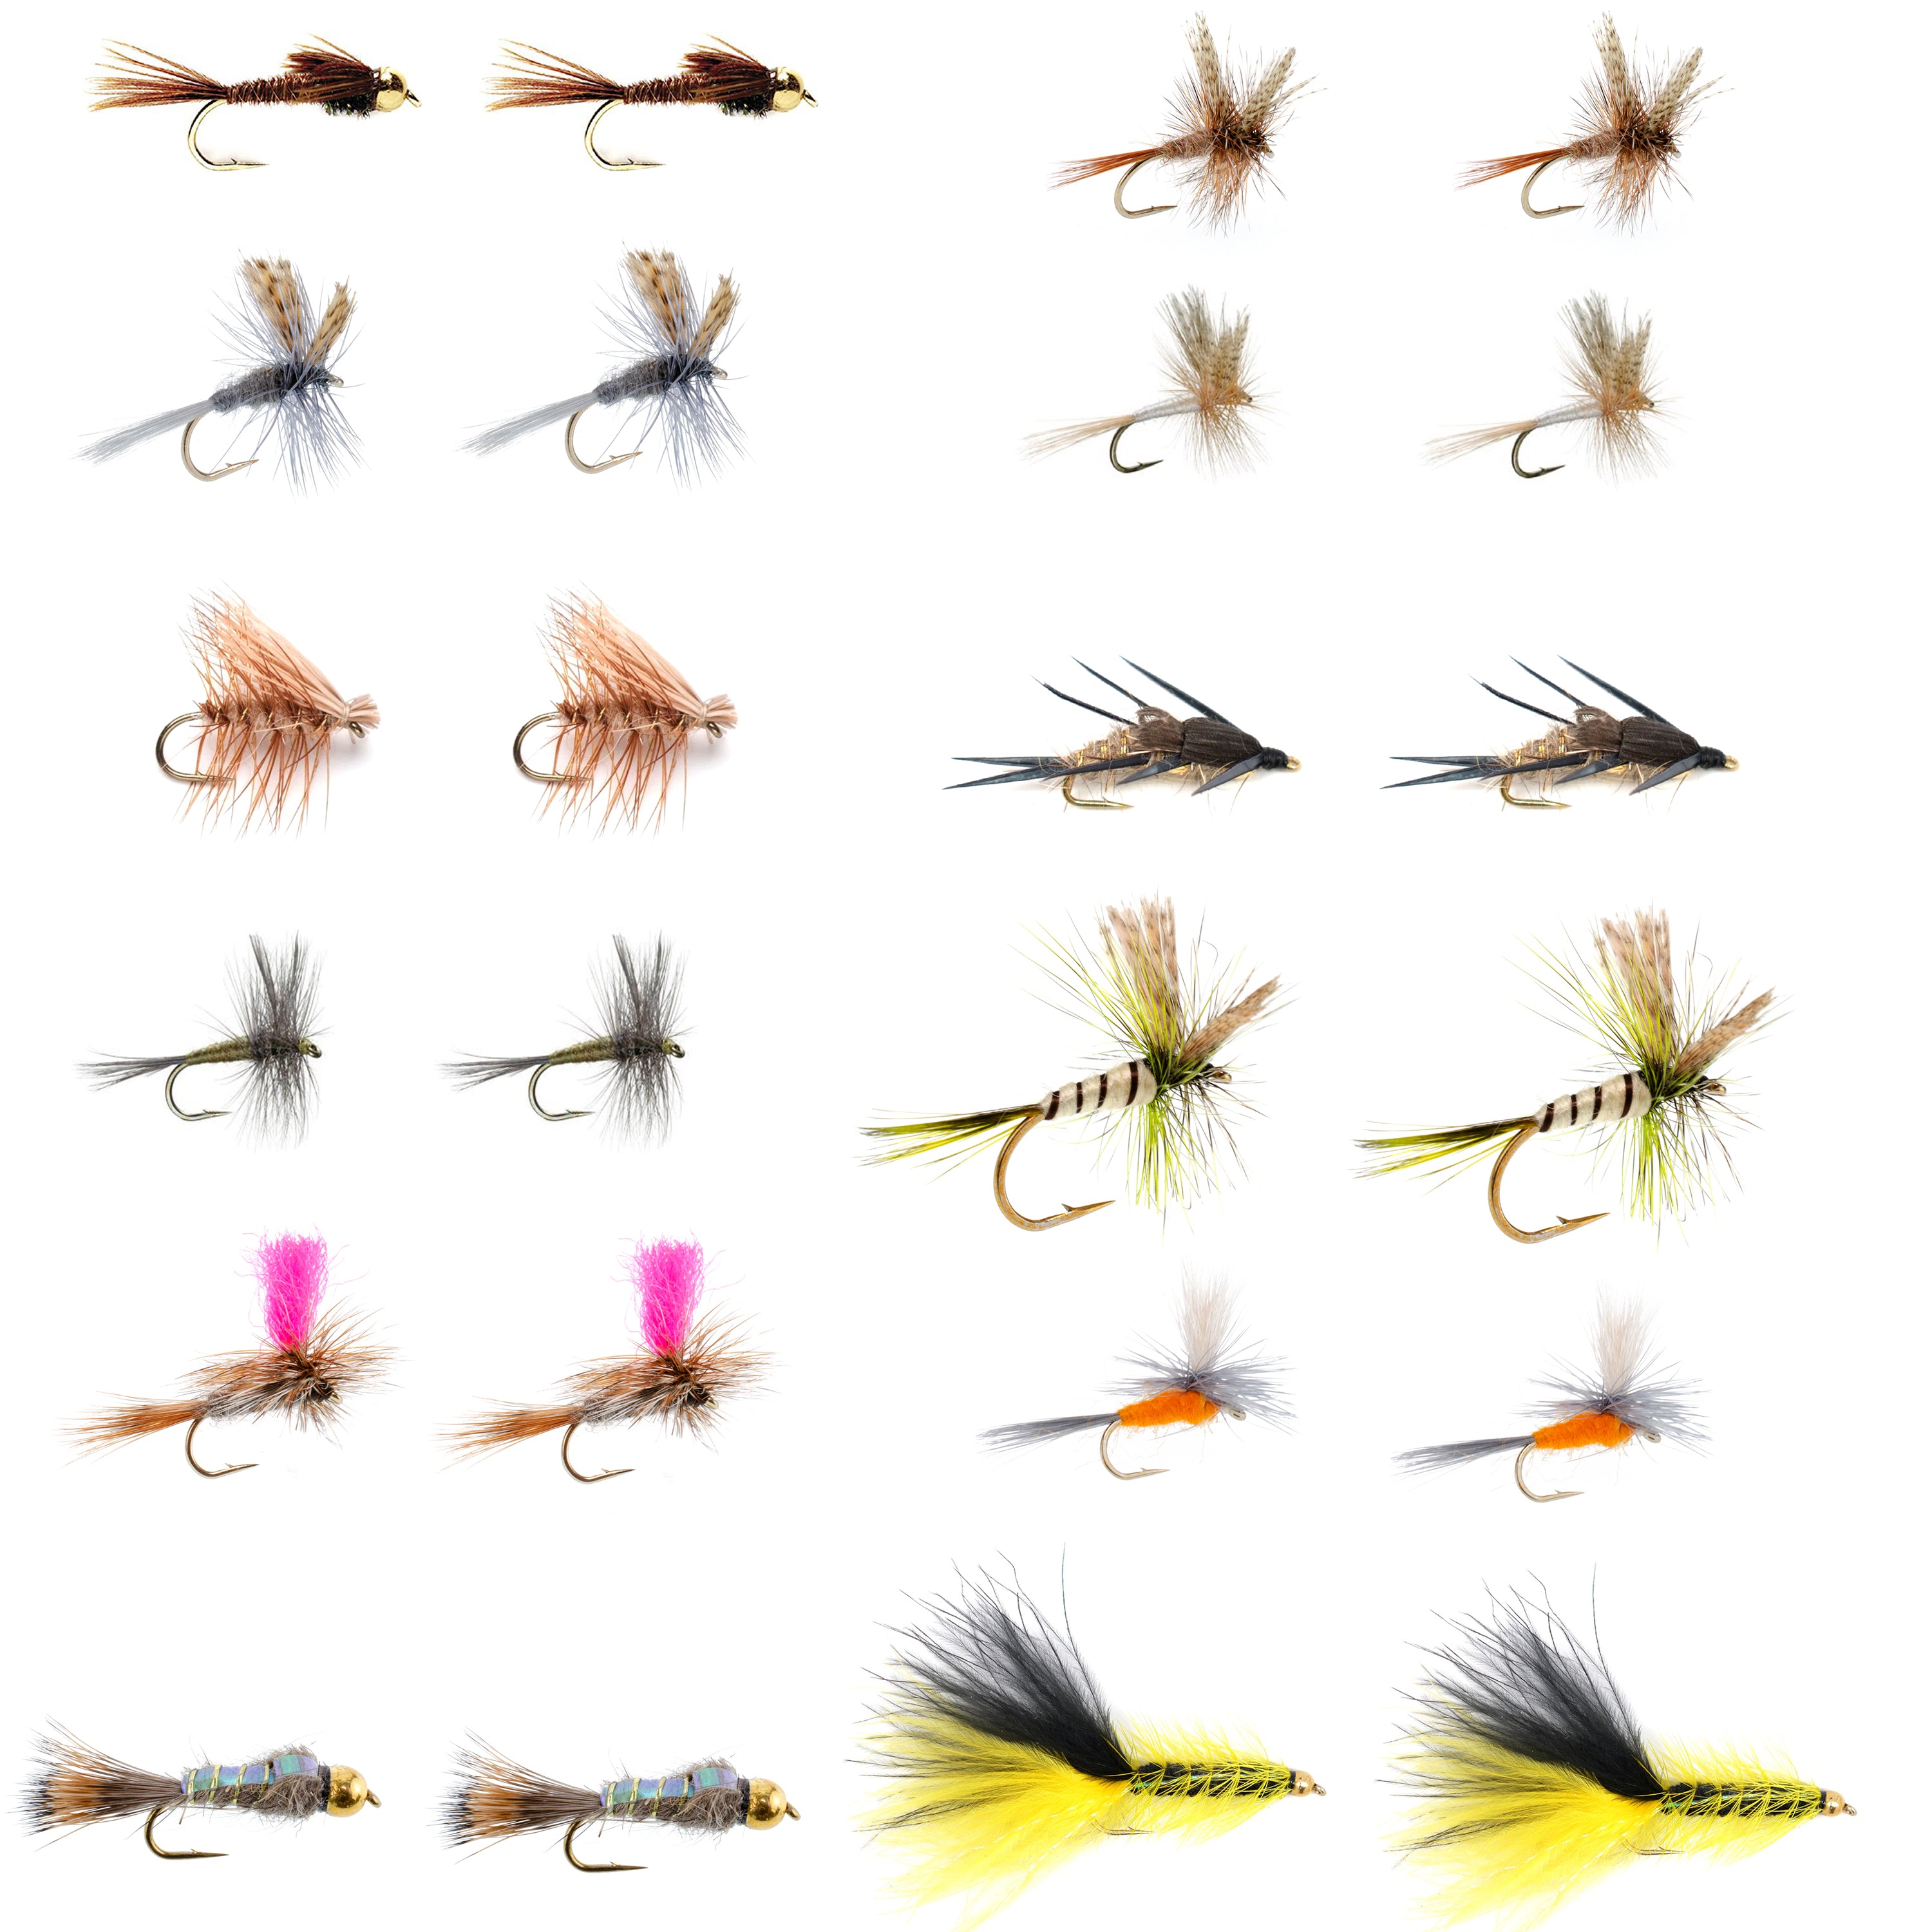 Eastern Trout Fly Assortment - 24 Essential Dry and Nymph Fly Fishing Flies Collection - Trout Flies with Gift Fly Box